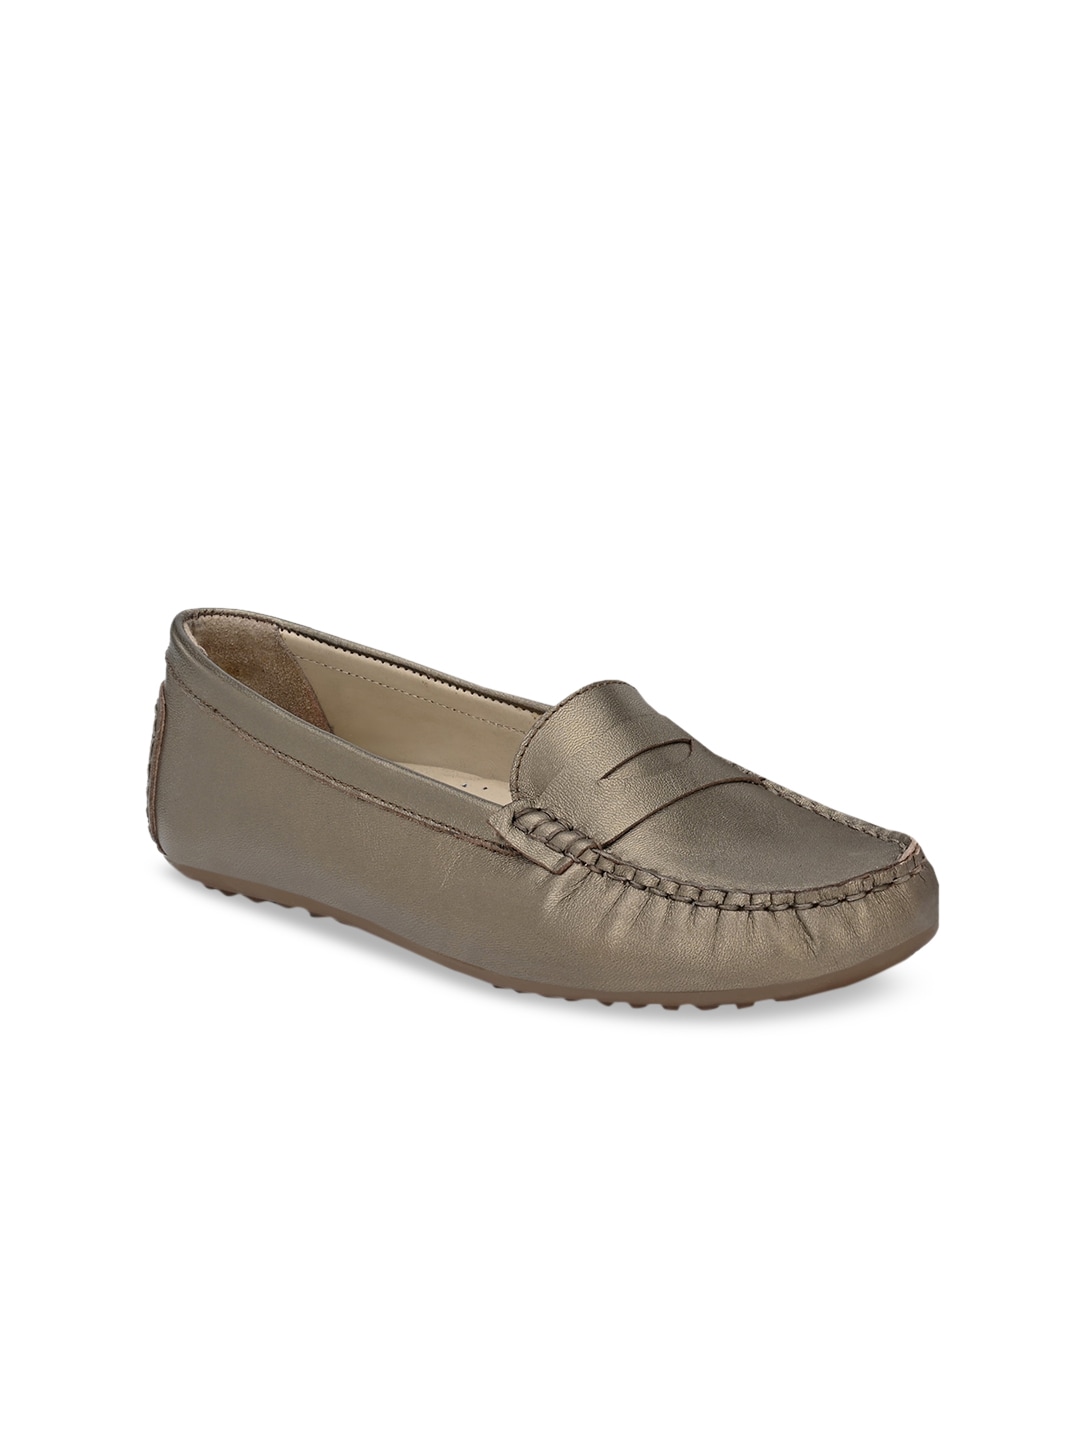 CARLO ROMANO Women Leather Loafers Price in India